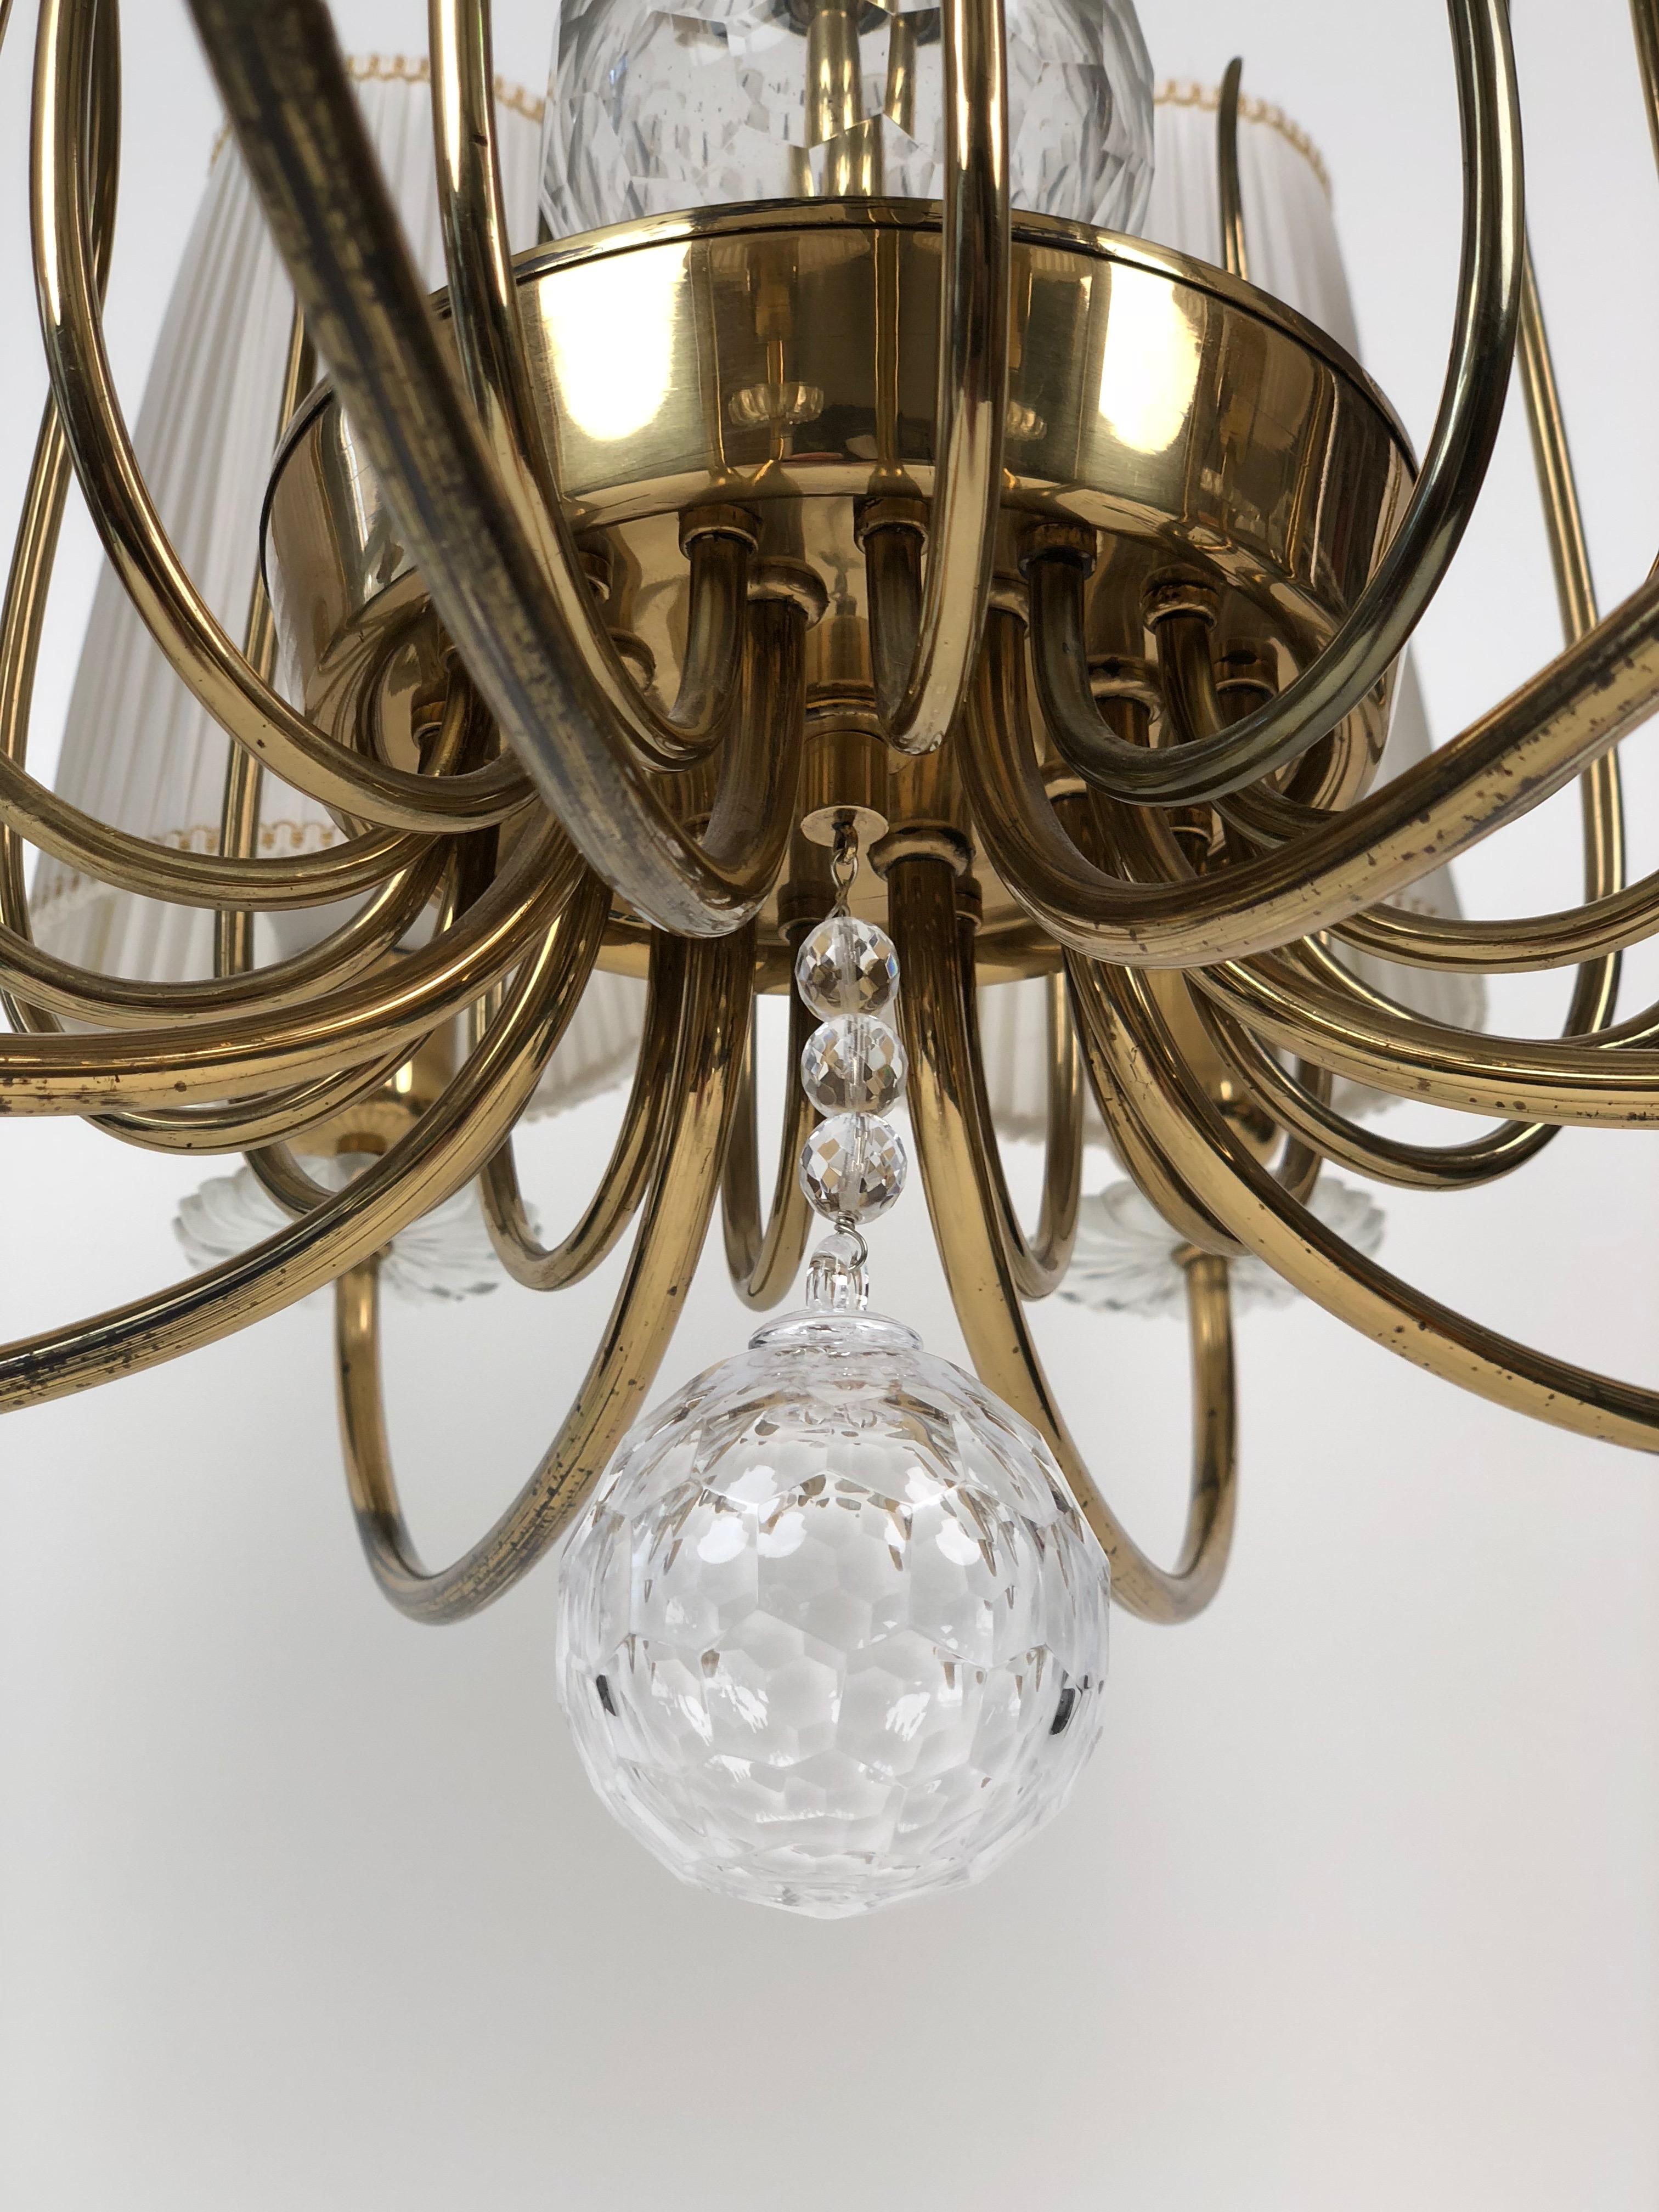 Elegant chandelier from Austrian producer J. L. Lobmeyr with 8 arms, crystal elements and original shades in white silk.
The pendant lamp has the possibility to use only the half of the lights, through switch.
      